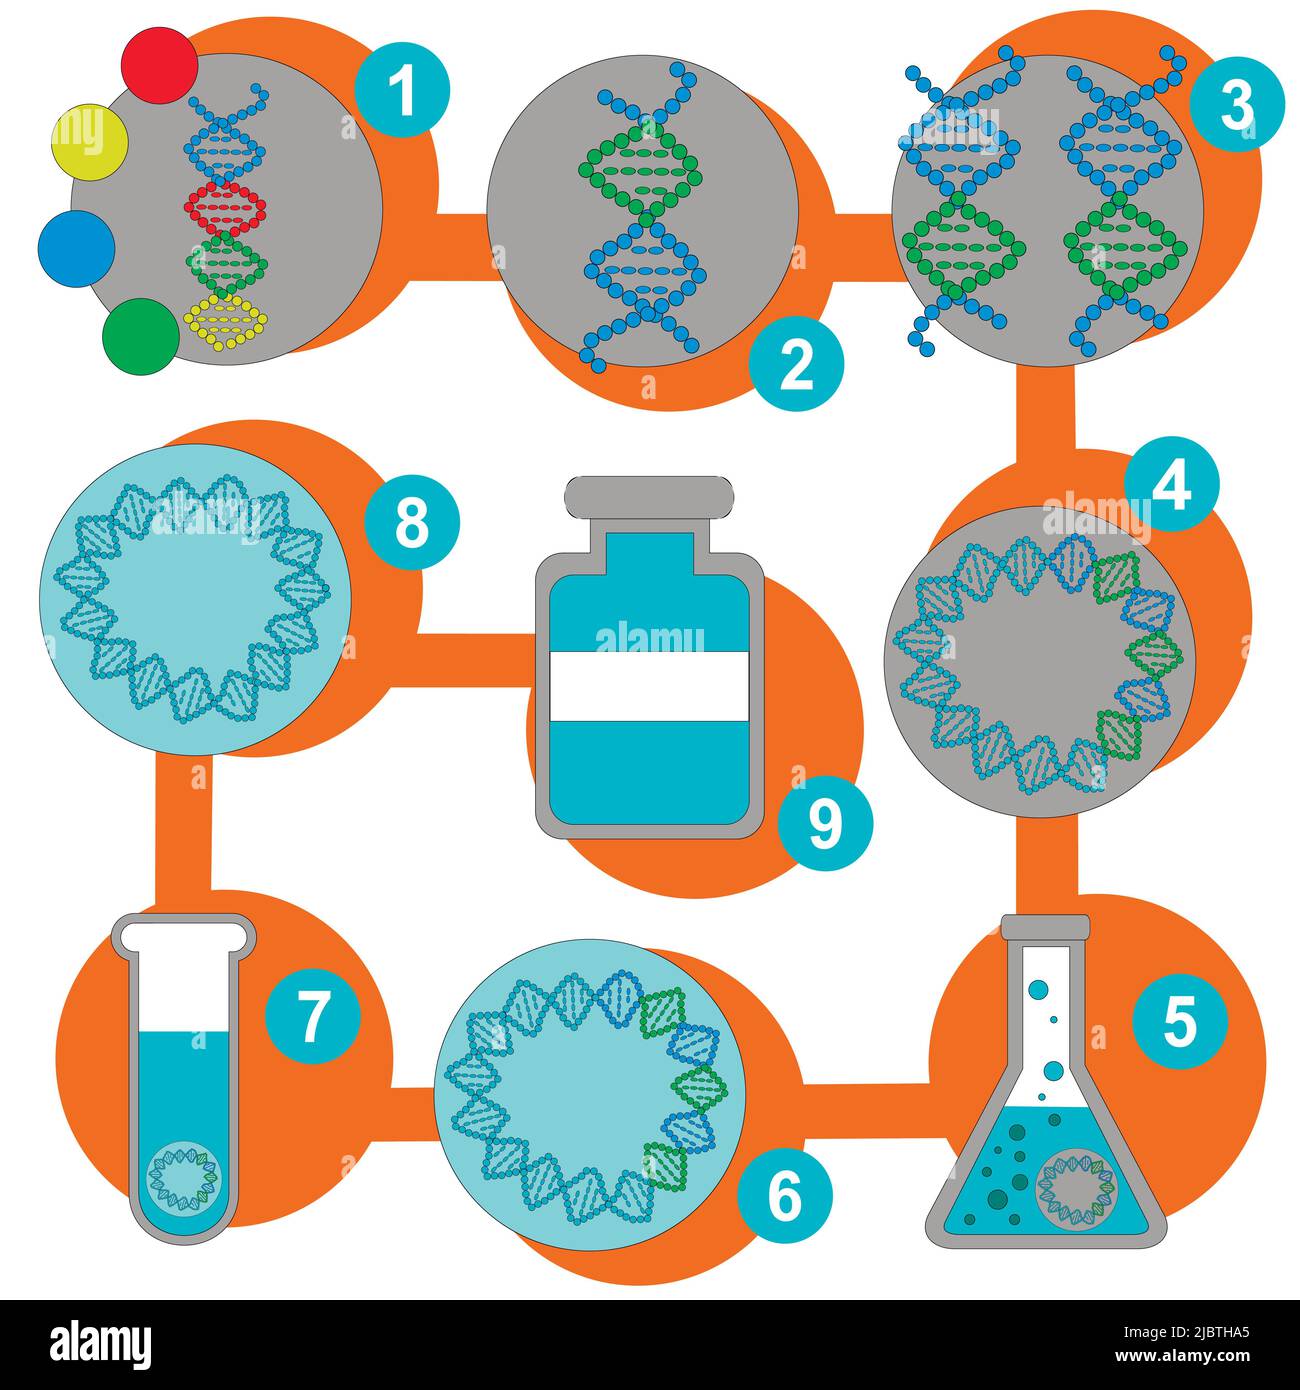 Scheme for the production of a vaccine for a genetic virus. A simple illustration of the sequence of transforming a dangerous virus into a medicine. Stock Vector